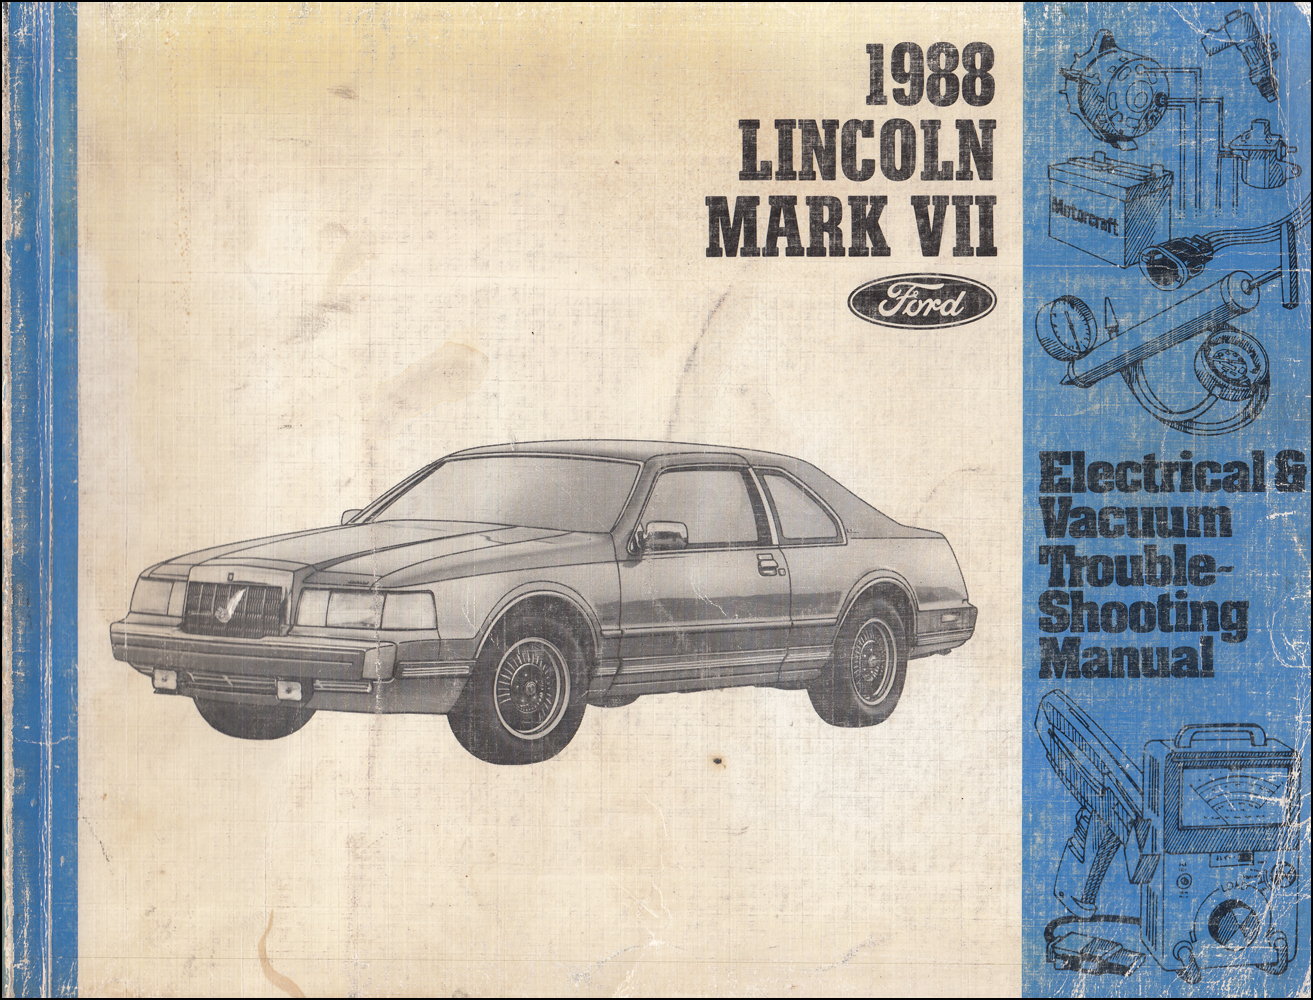 1988 Lincoln Mark VII Electrical and Vacuum Troubleshooting Manual